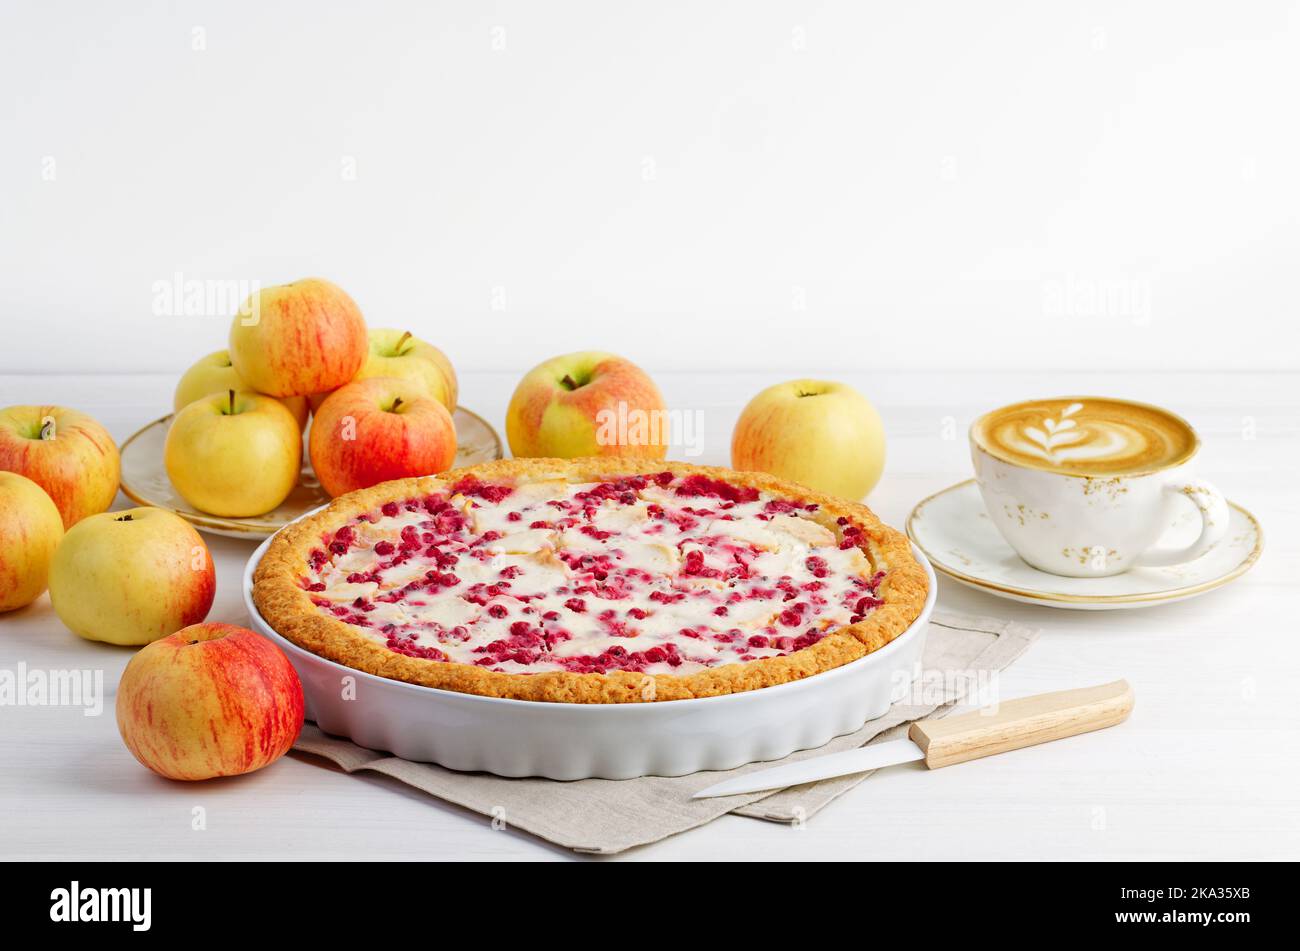 Homemade apple and redcurrant pie and cup of coffee cappuccino on white wooden table. Copyspace. Stock Photo